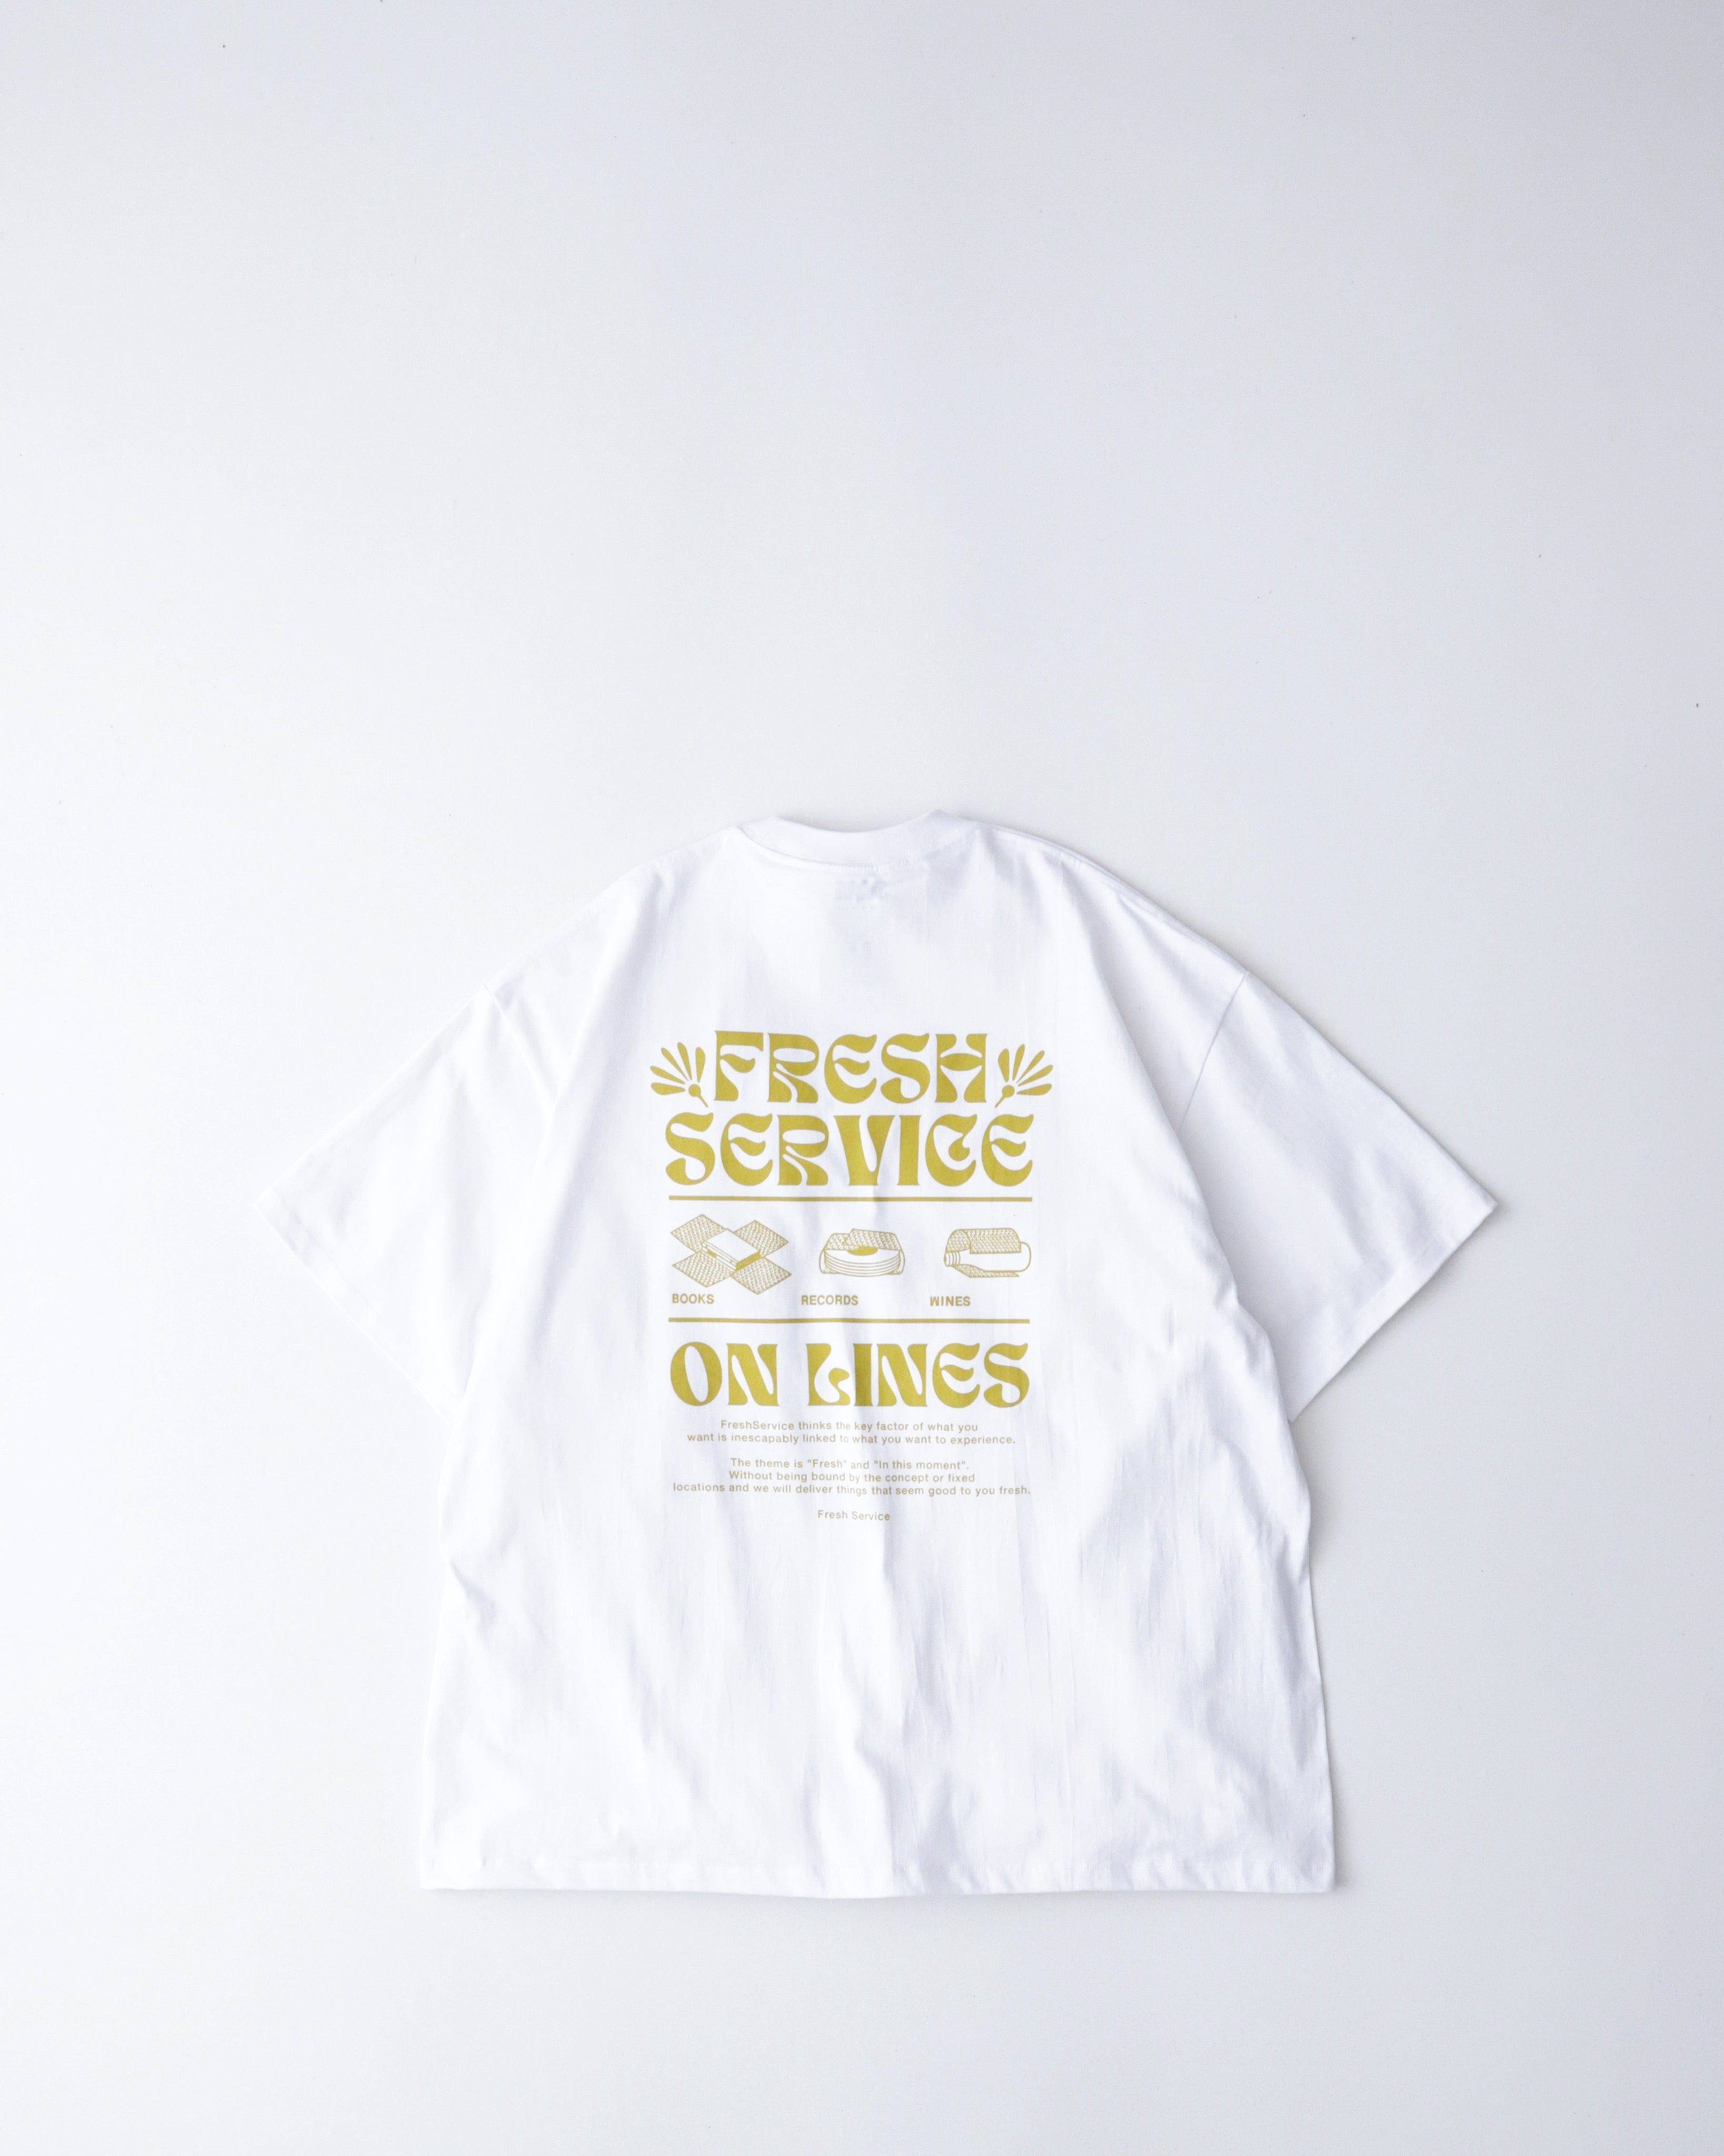 FreshService CORPORATE PRINTED S/S TEE ”ON LINES” – NCNR WEB STORE